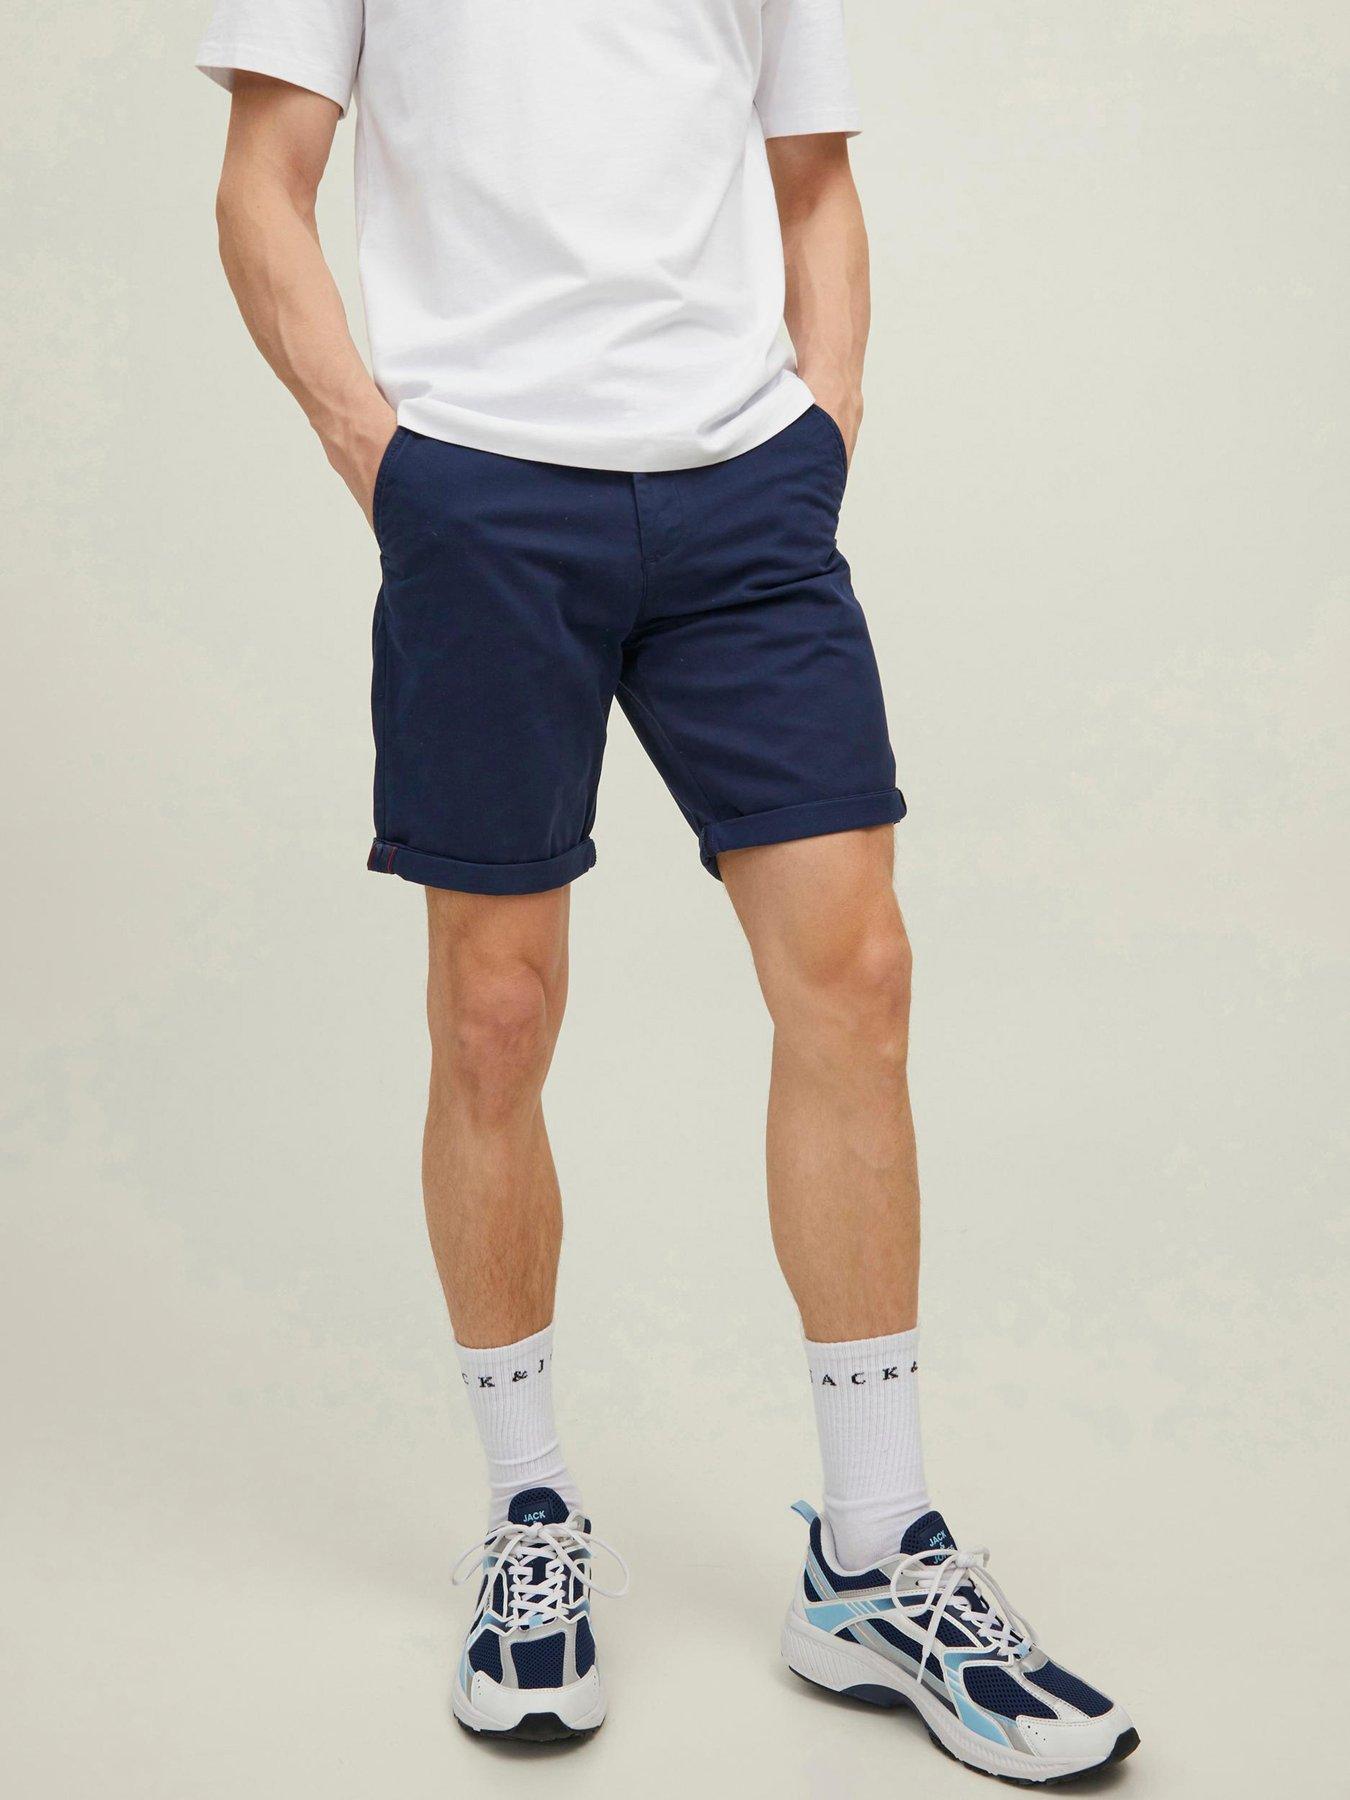 Selected Homme loose fit chino shorts in navy